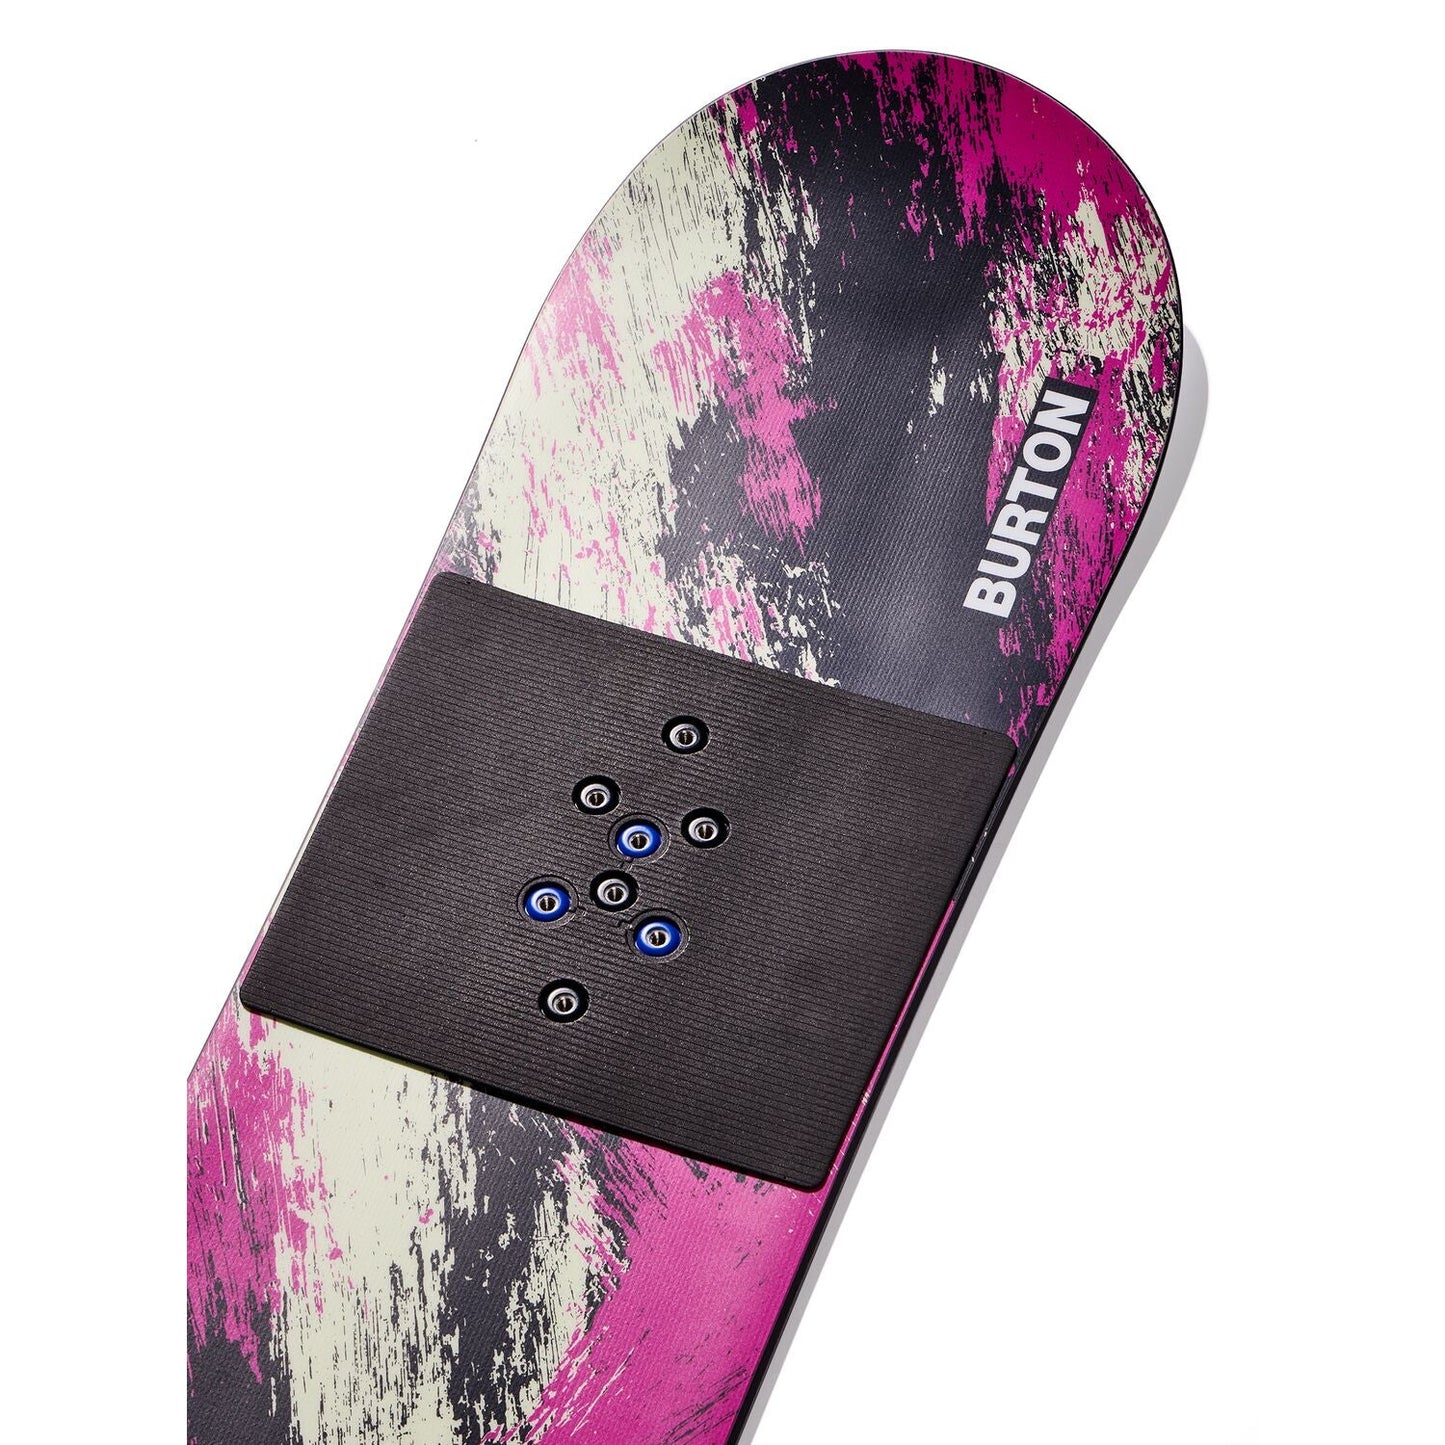 Burton Grom Snowboard Purple/Teal **in store pick-up only**